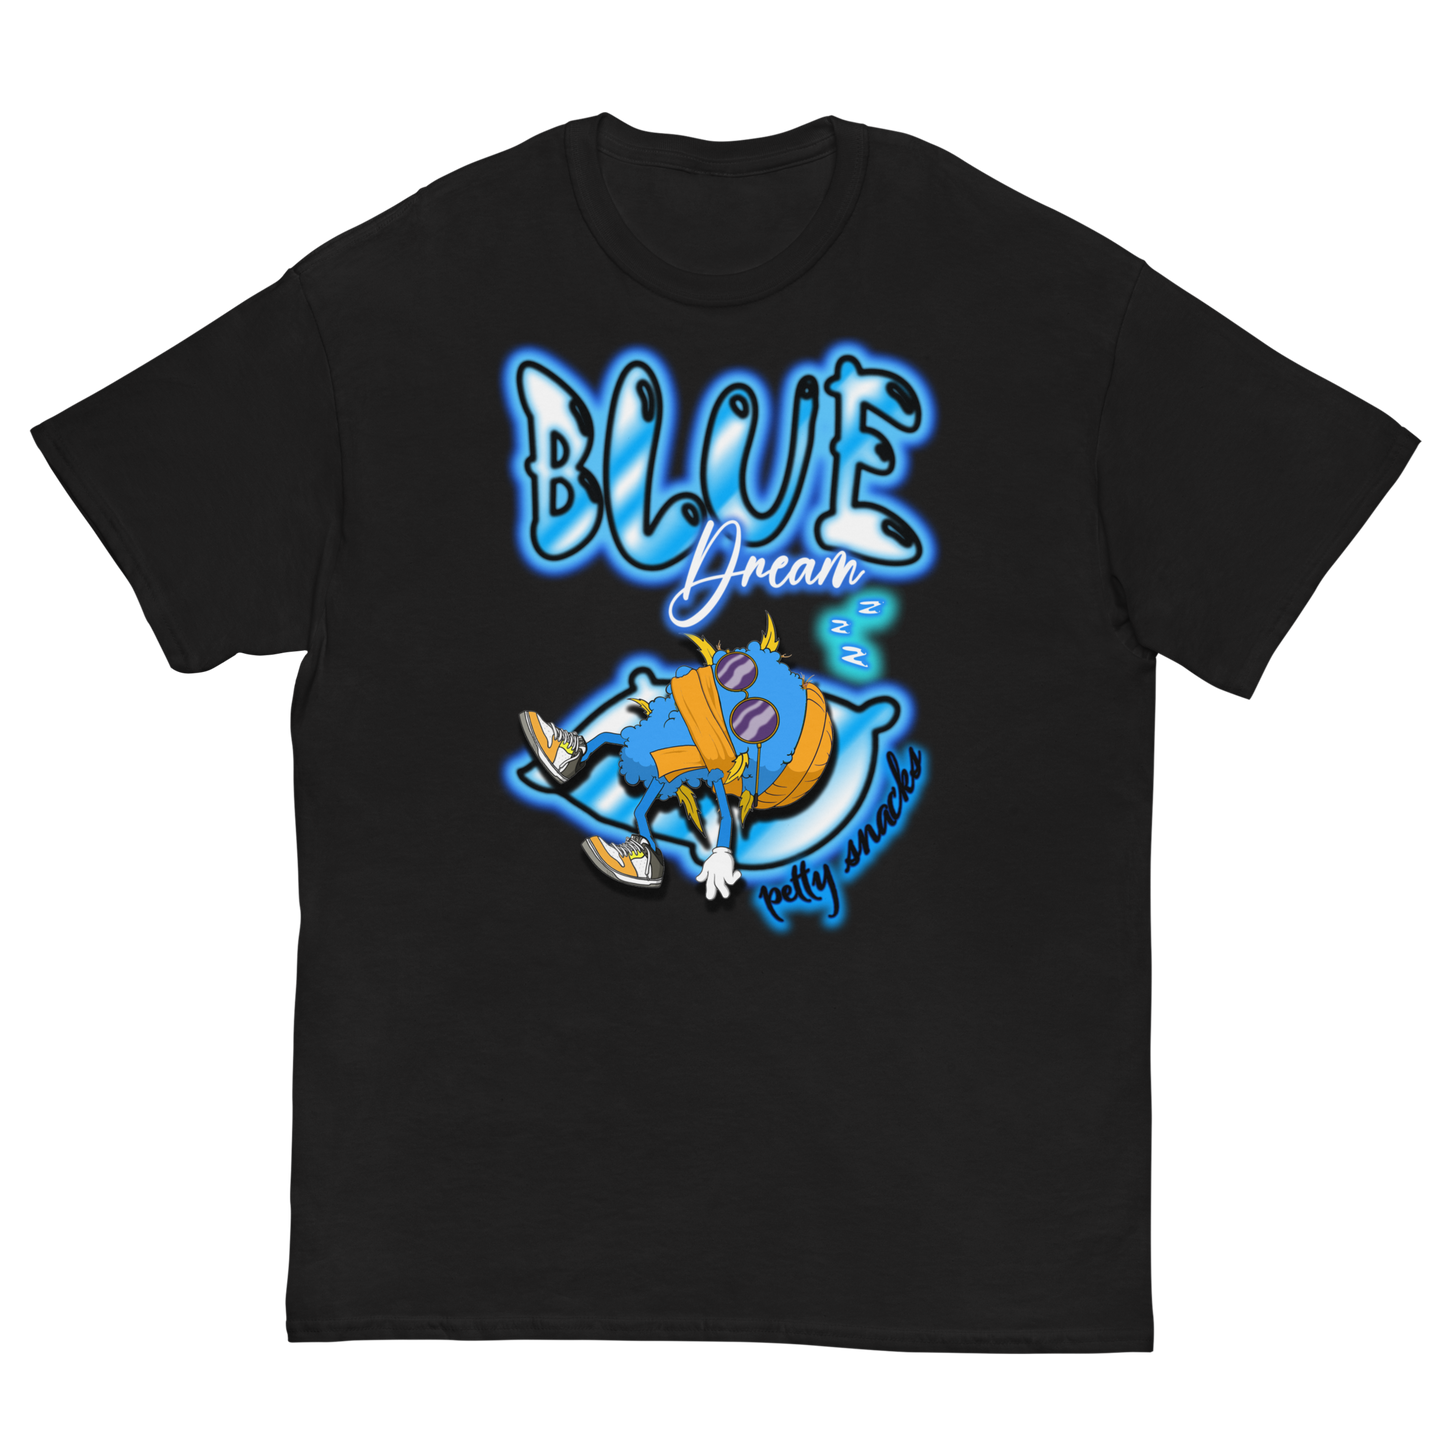 Black tee. Big blue airbrush style lettering that reads "Blue Dream" on top. Below that, a blue weed nugget character wearing orange beanie sleeping on an pillow. The brand name "Petty Snacks" is under the pillow in small airbrush style